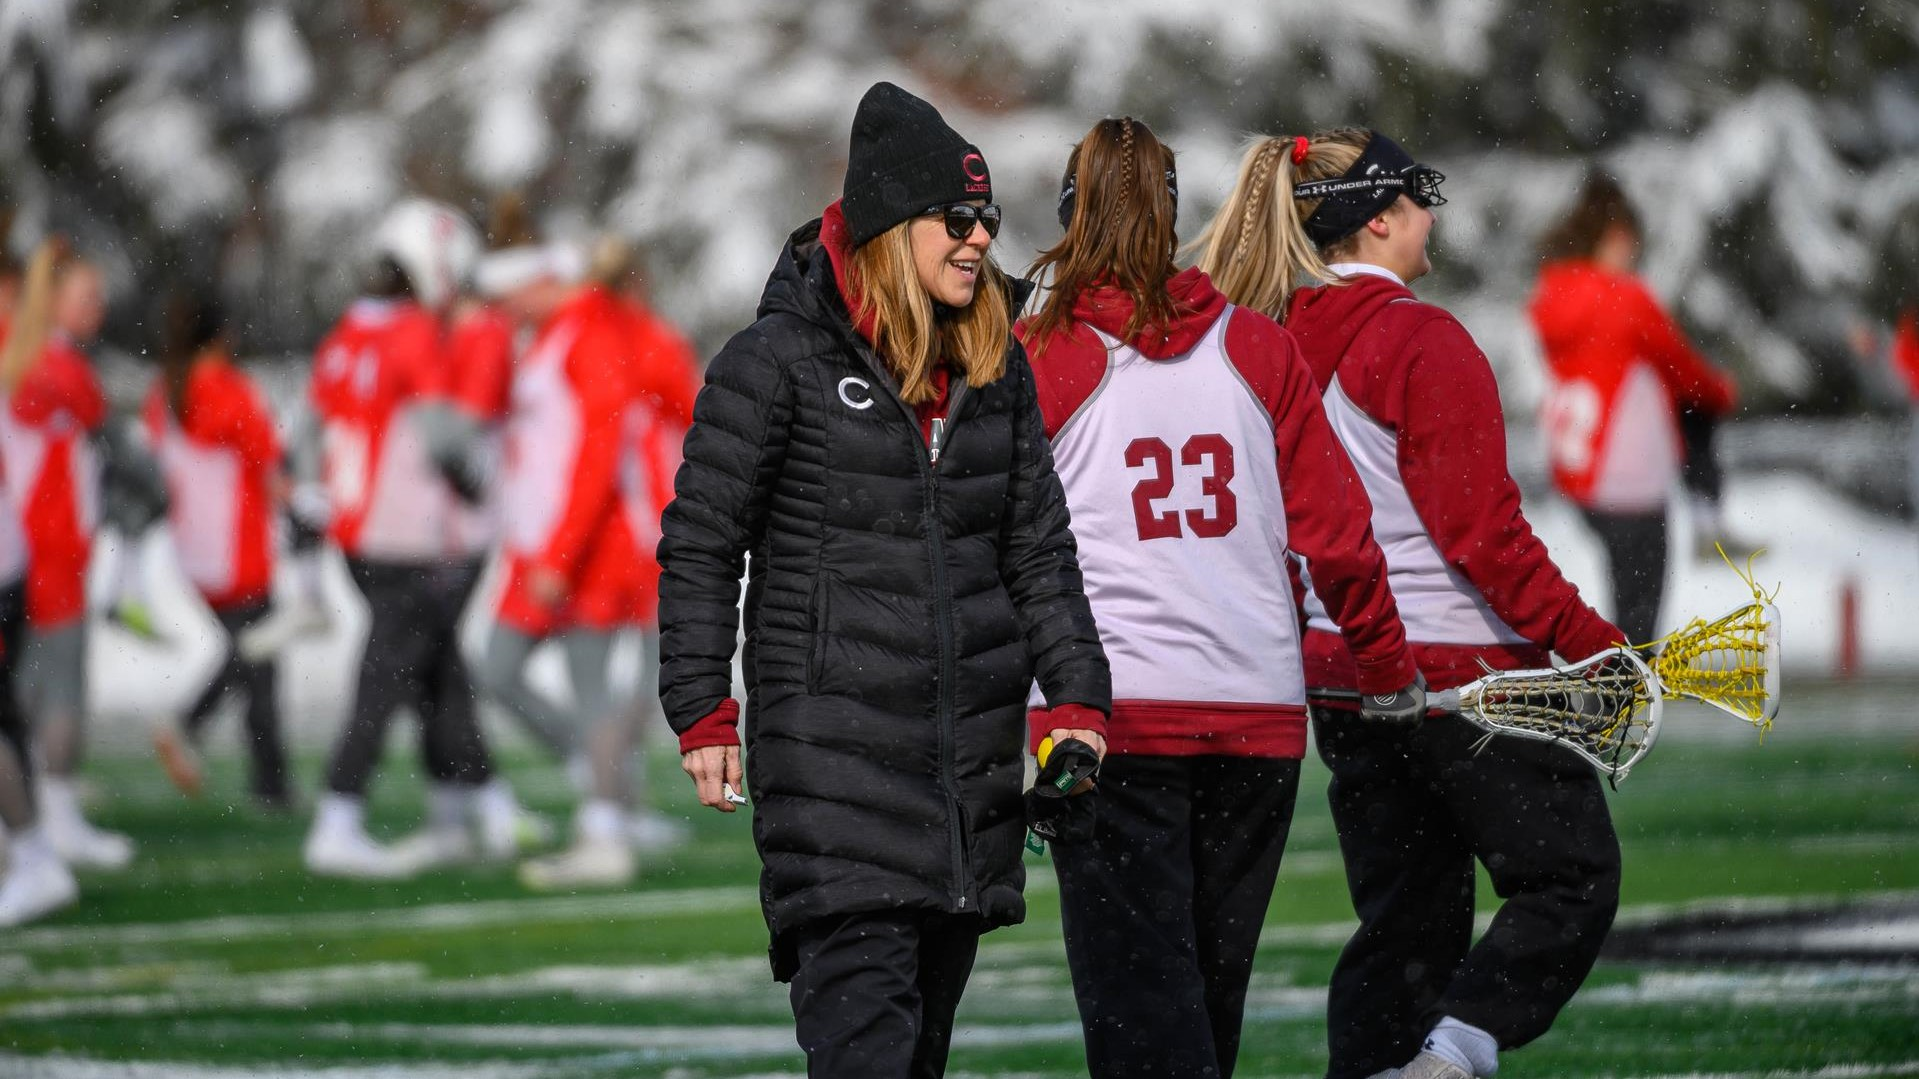 Live Updates: Taylor, University Issue Statements Regarding Reports of Coaching Misconduct